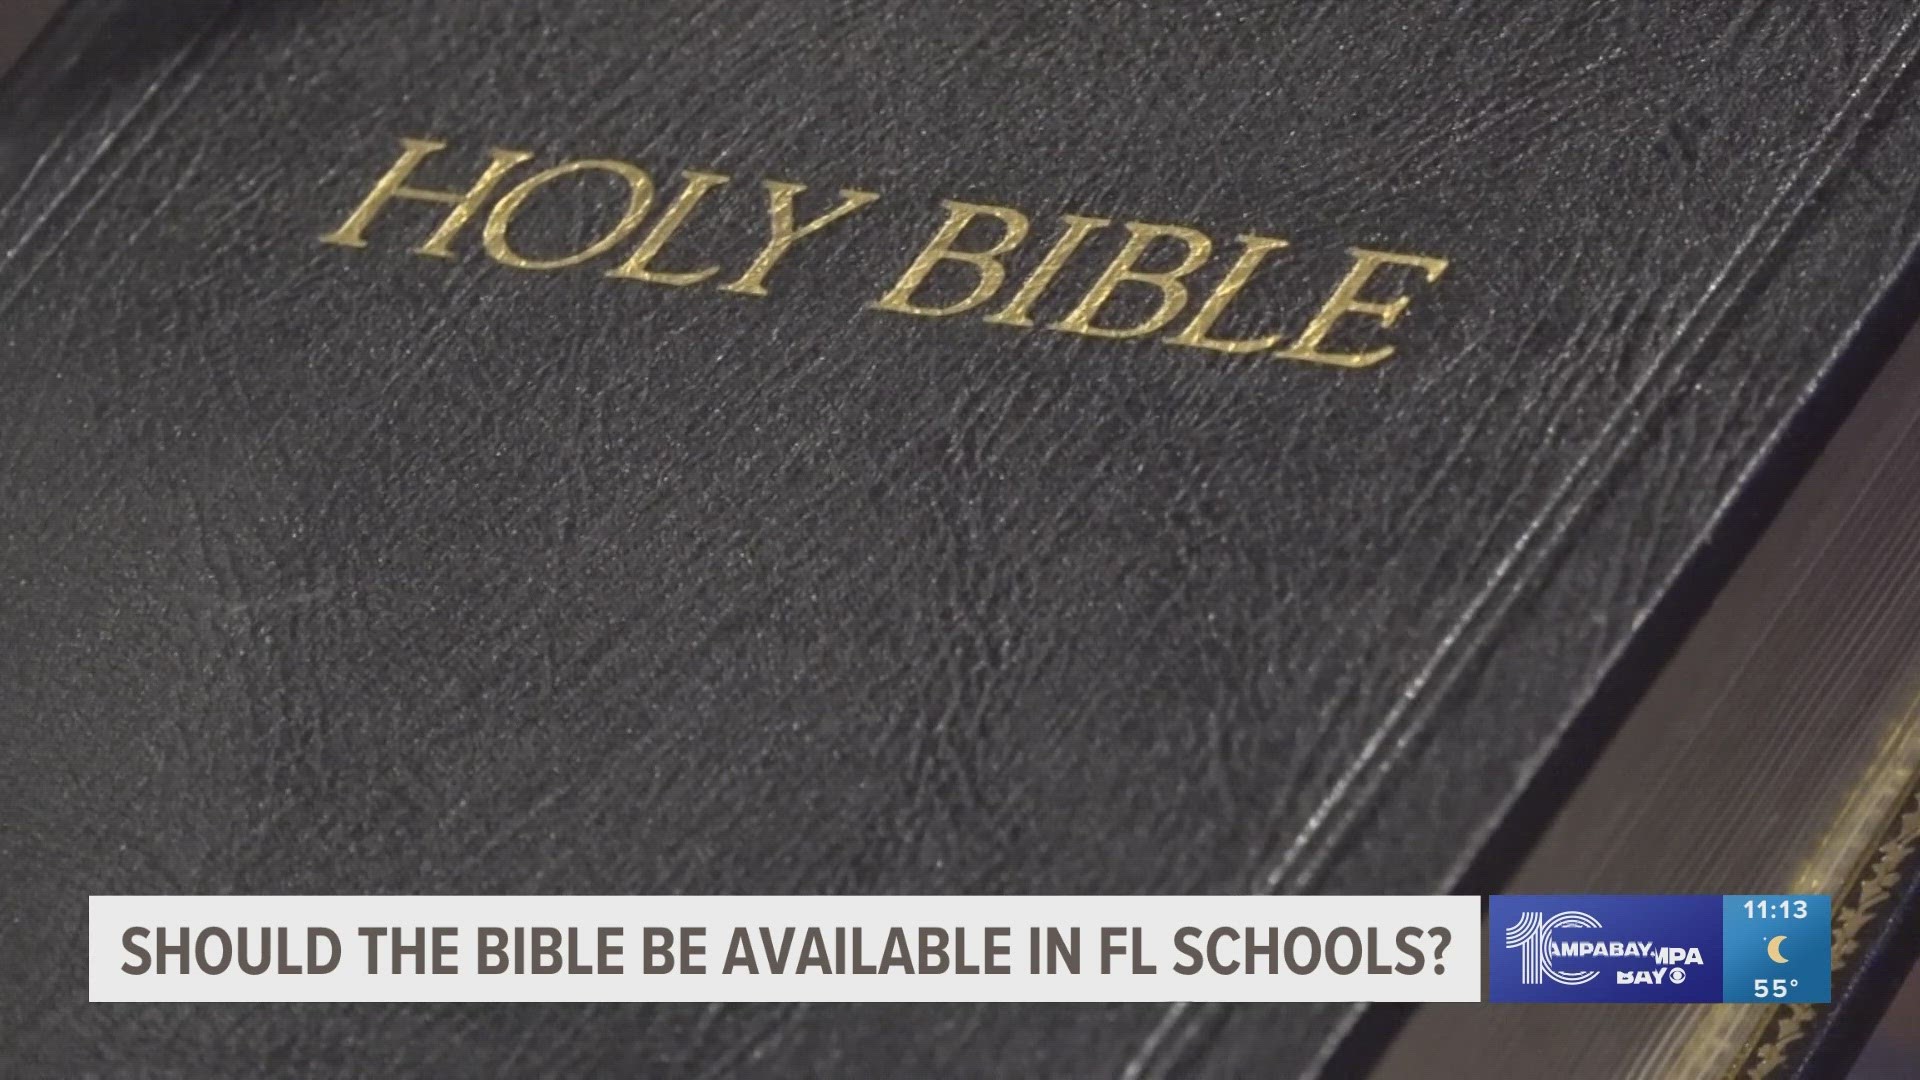 After some say recently passed education legislation targets minority and LGBTQ books, others are using it to file challenges against the Bible in schools.